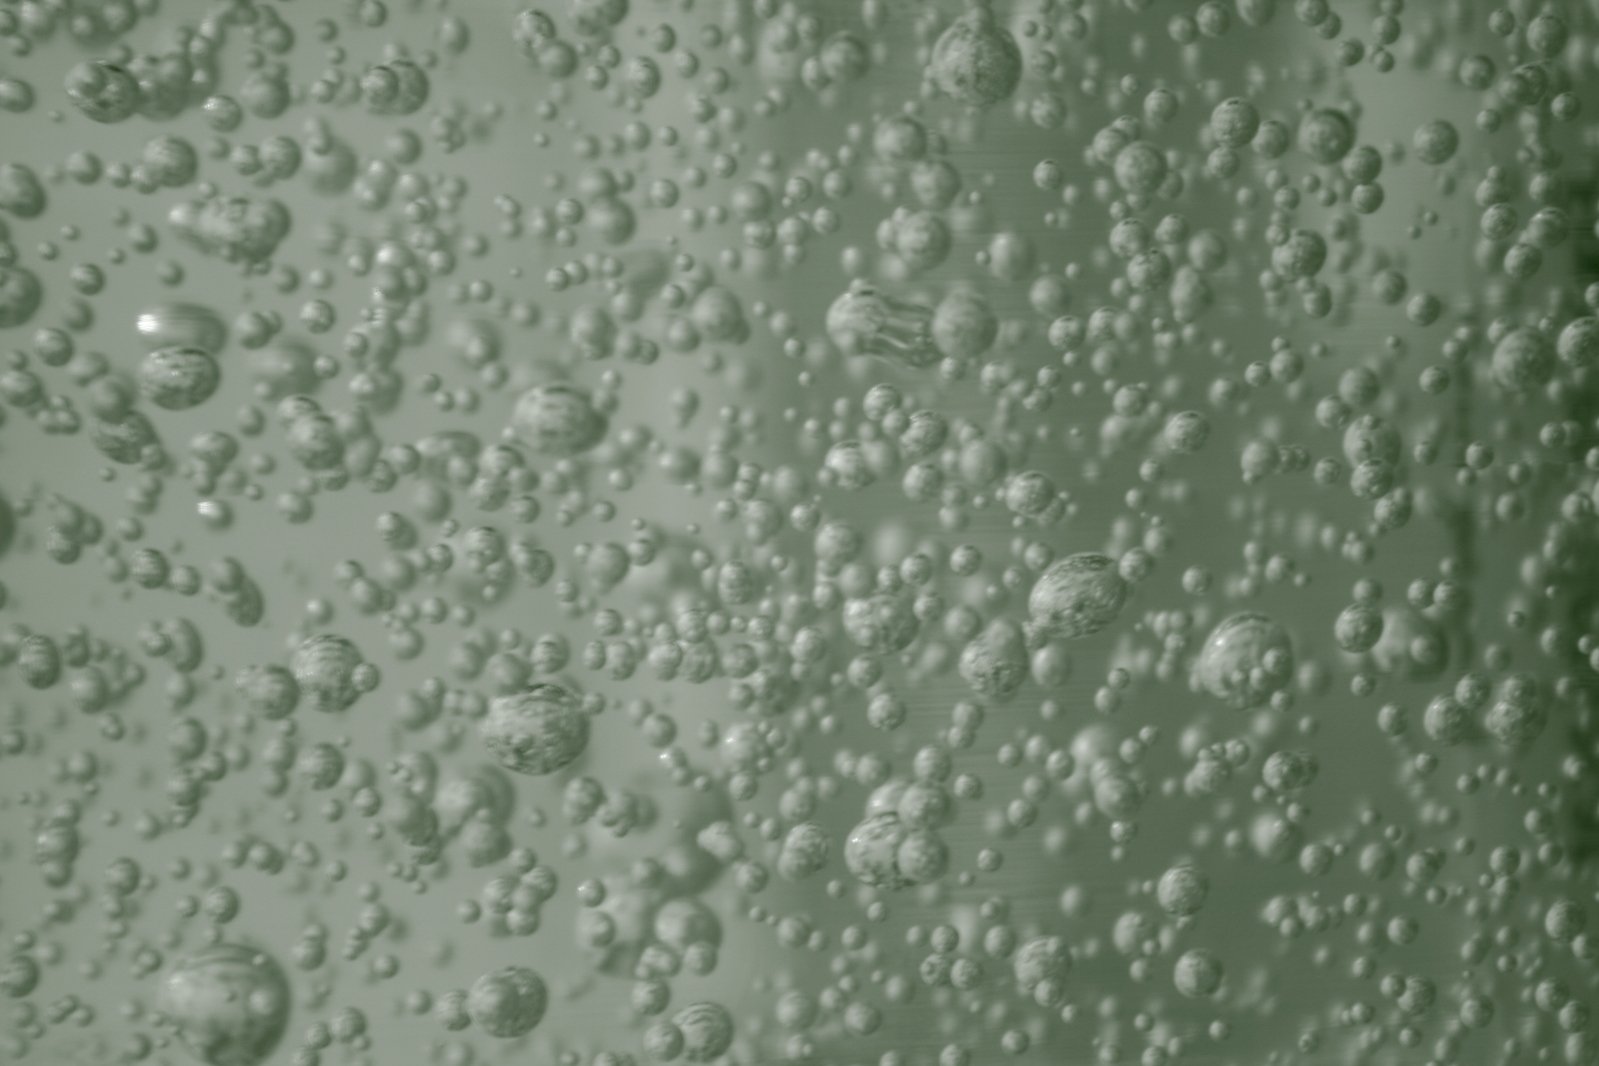 many bubbles of water are seen in a green color